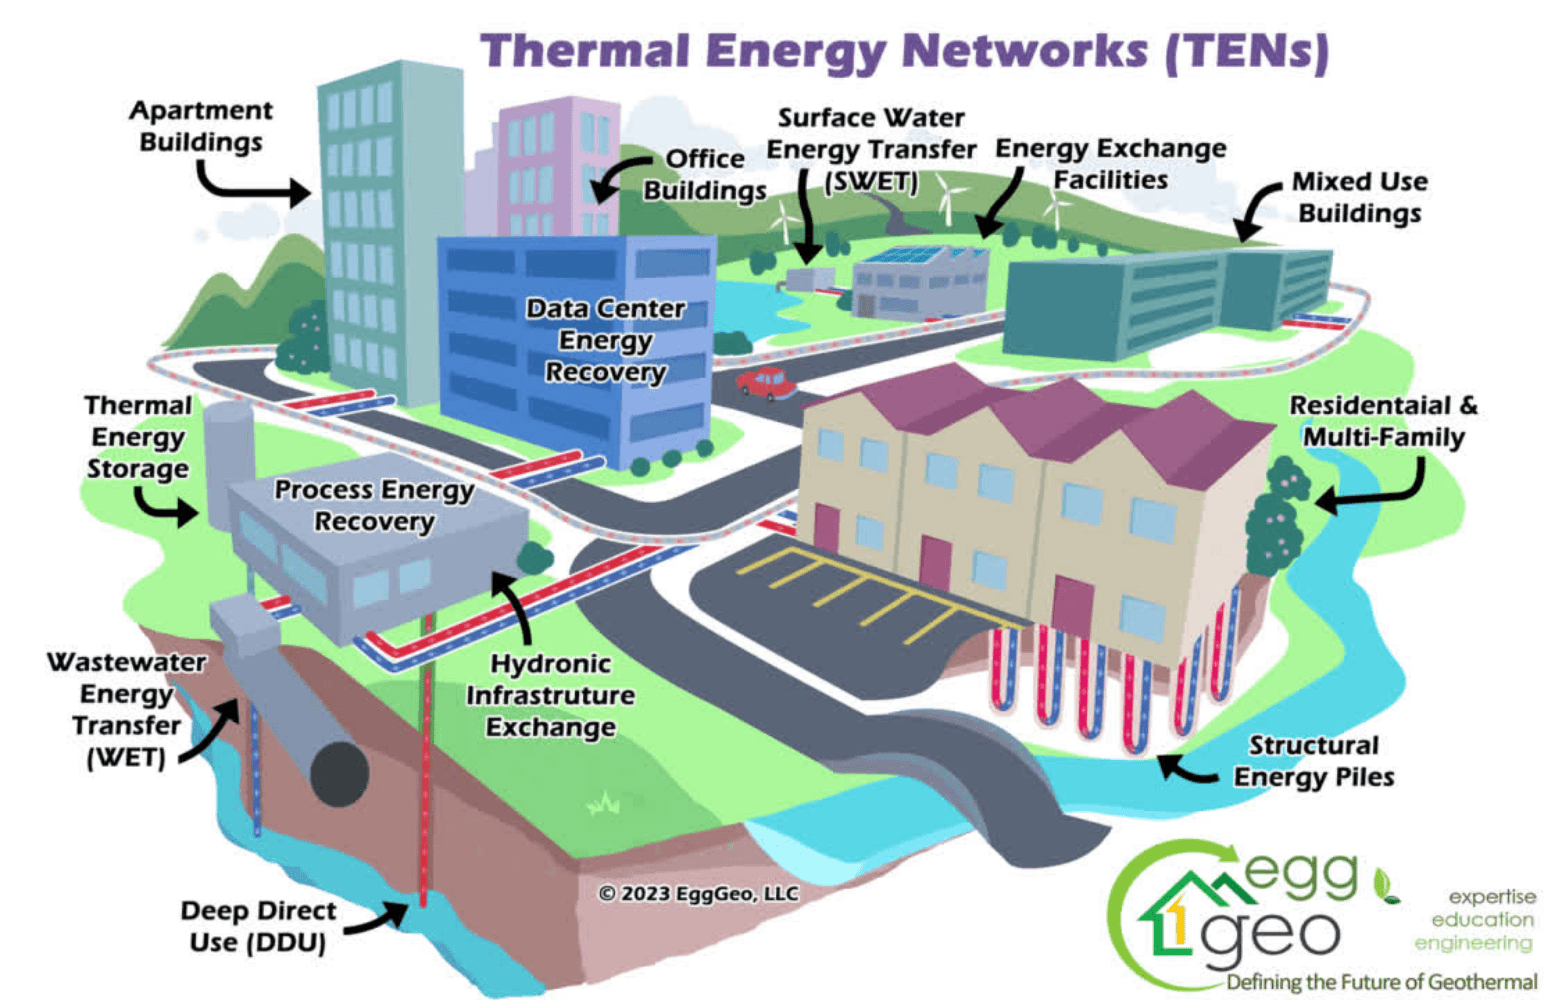 Thermal Energy Networks